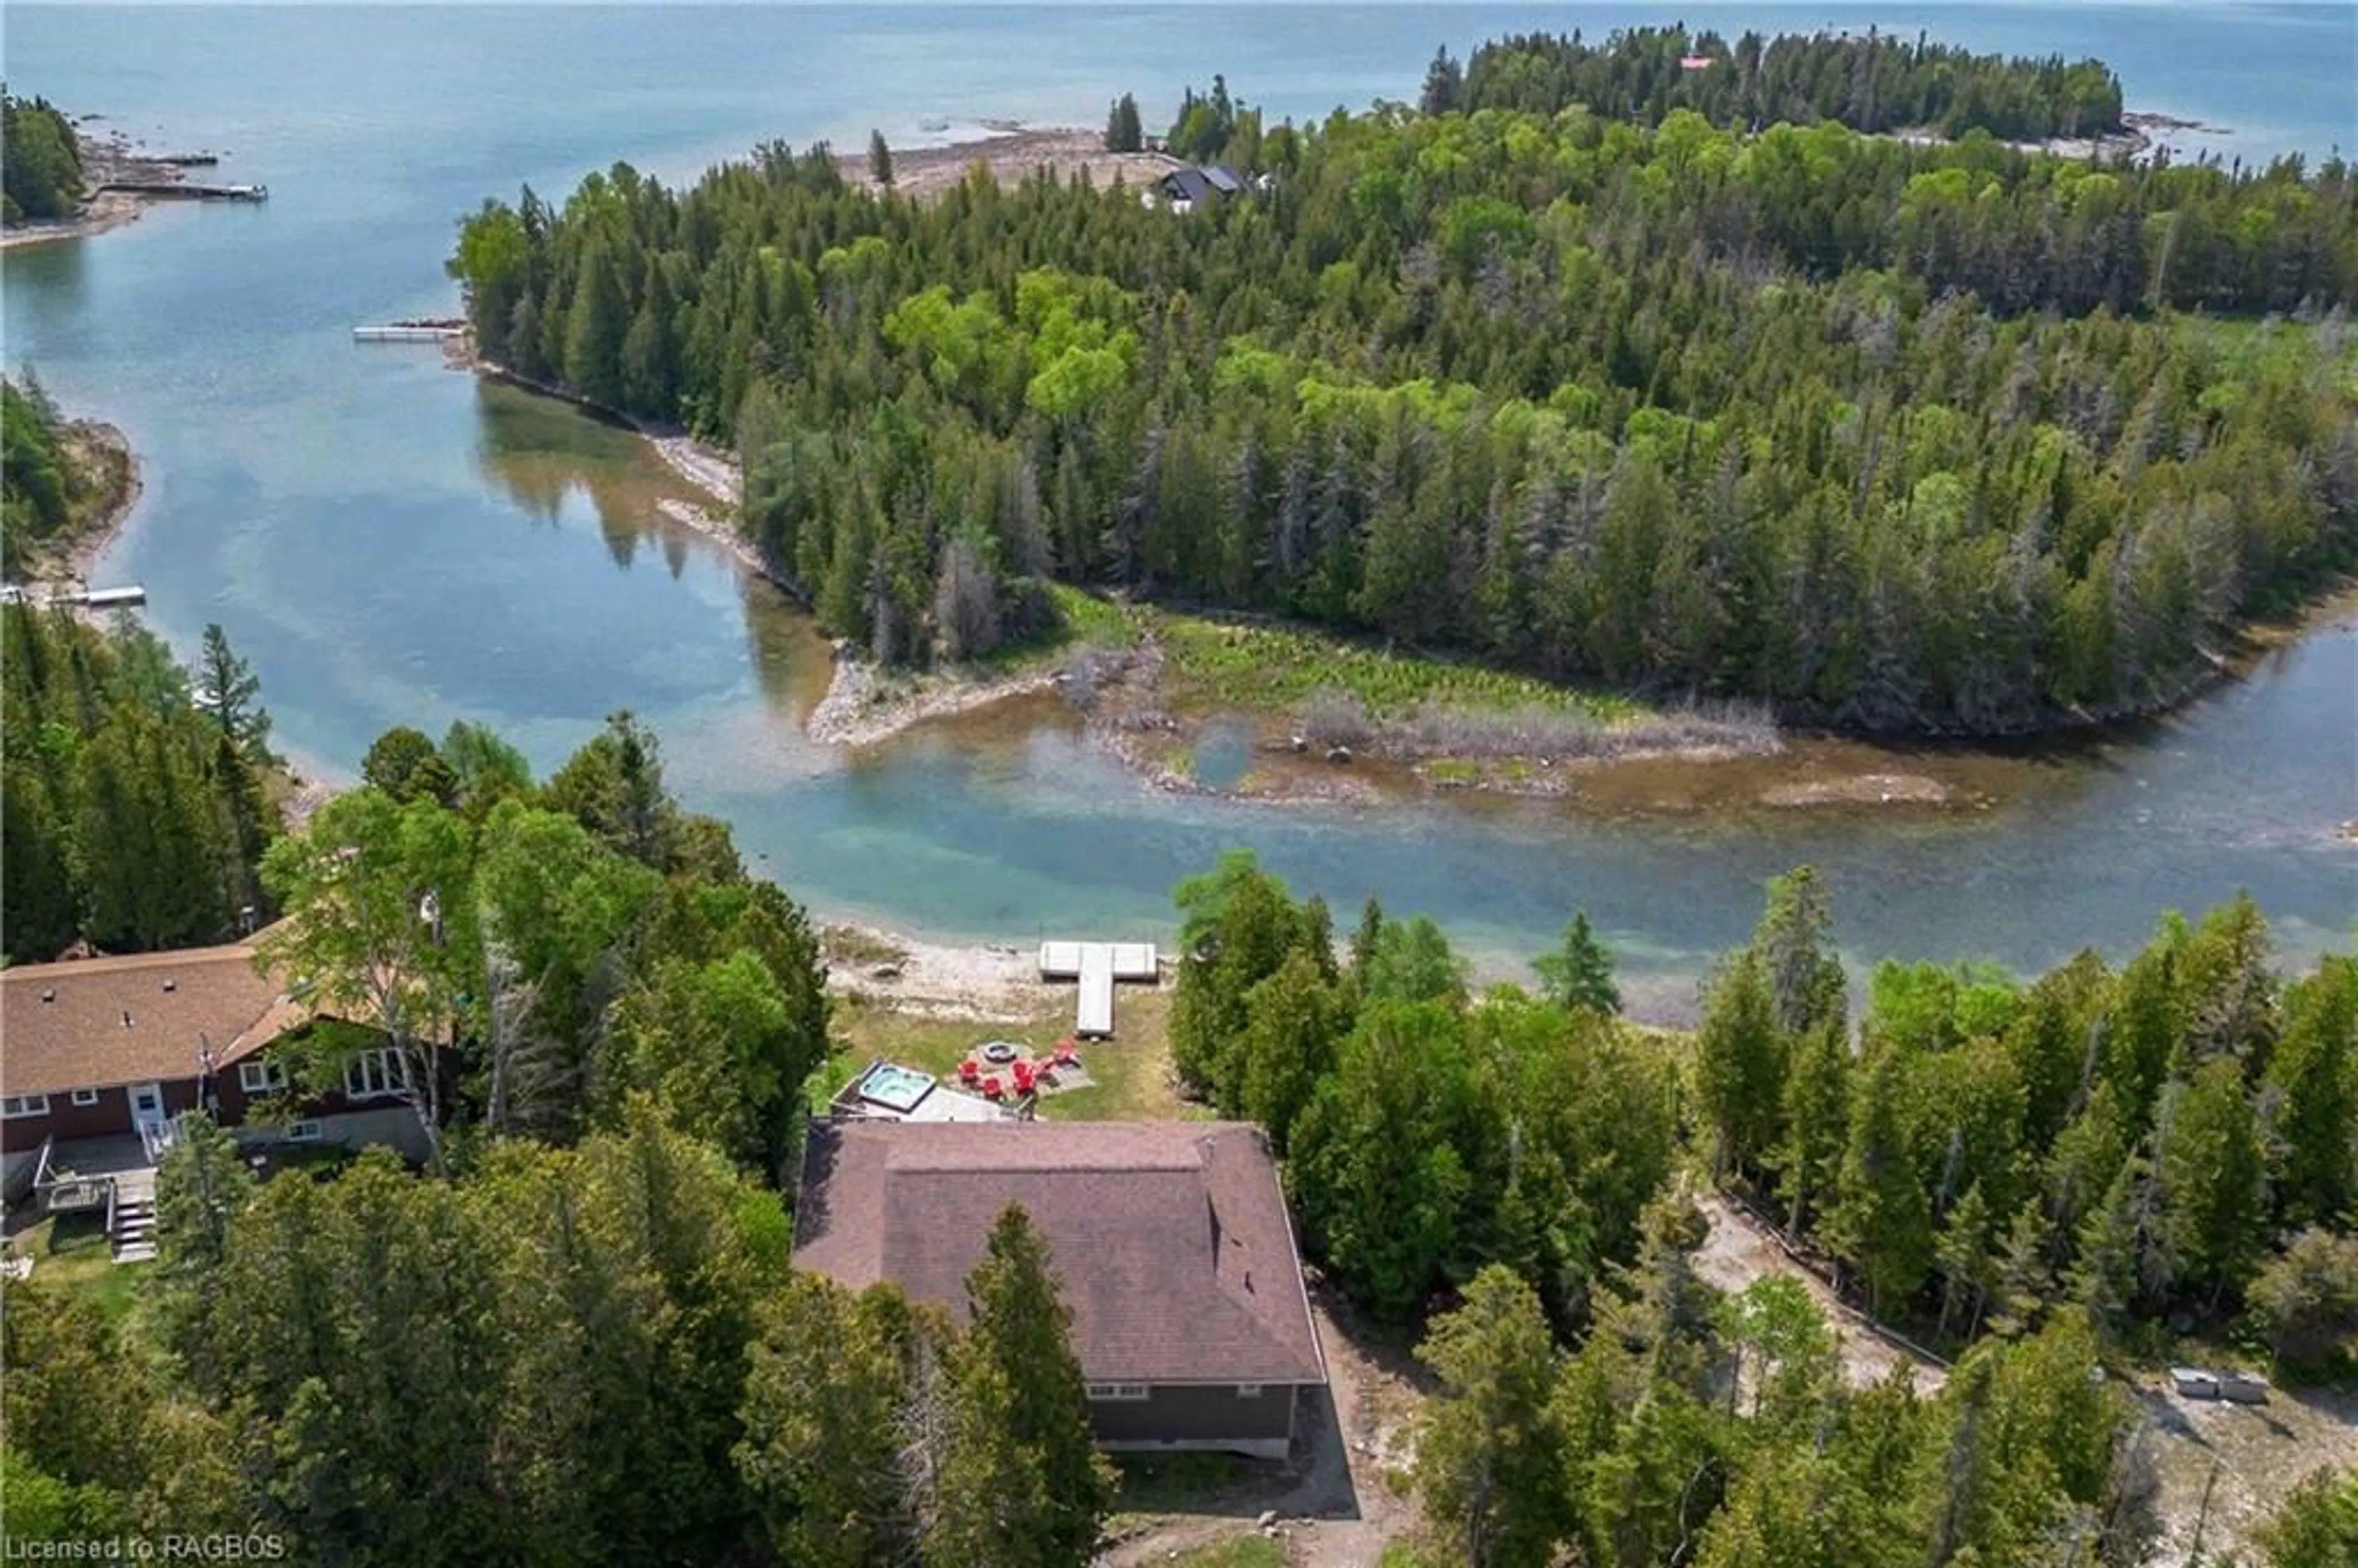 Lakeview for 55 Donald Rd, Northern Bruce Peninsula Ontario N0H 1Z0